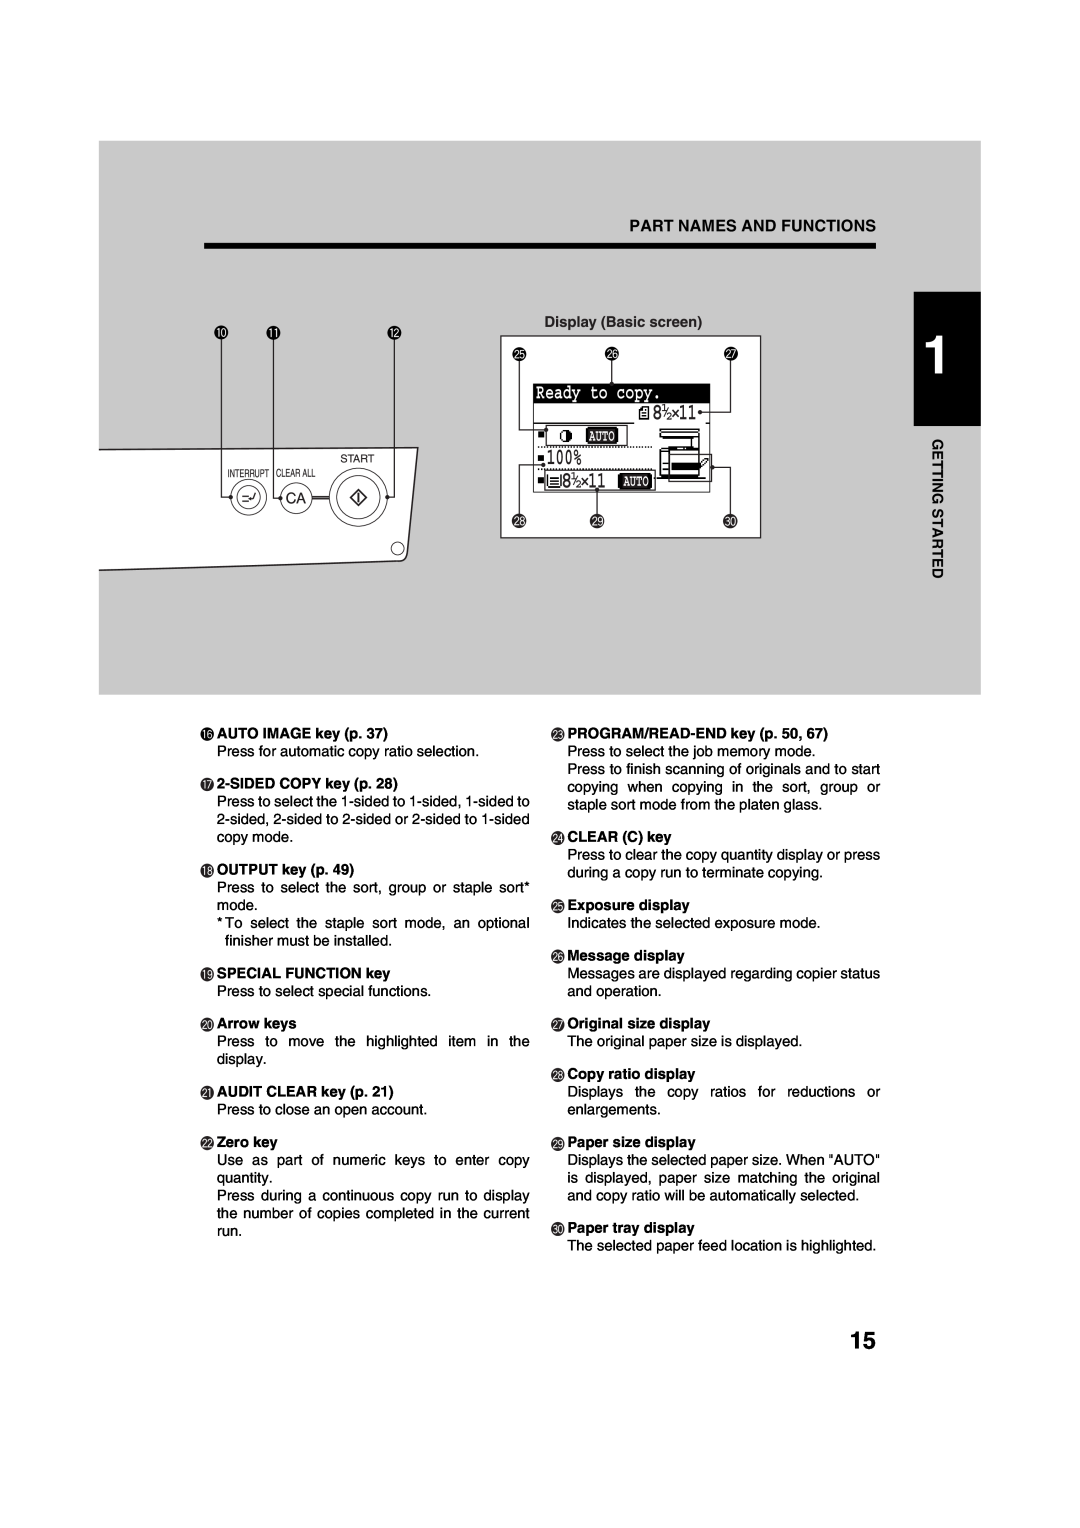 Sharp AR-M208 operation manual 100%, Part Names And Functions, Ready to copy 